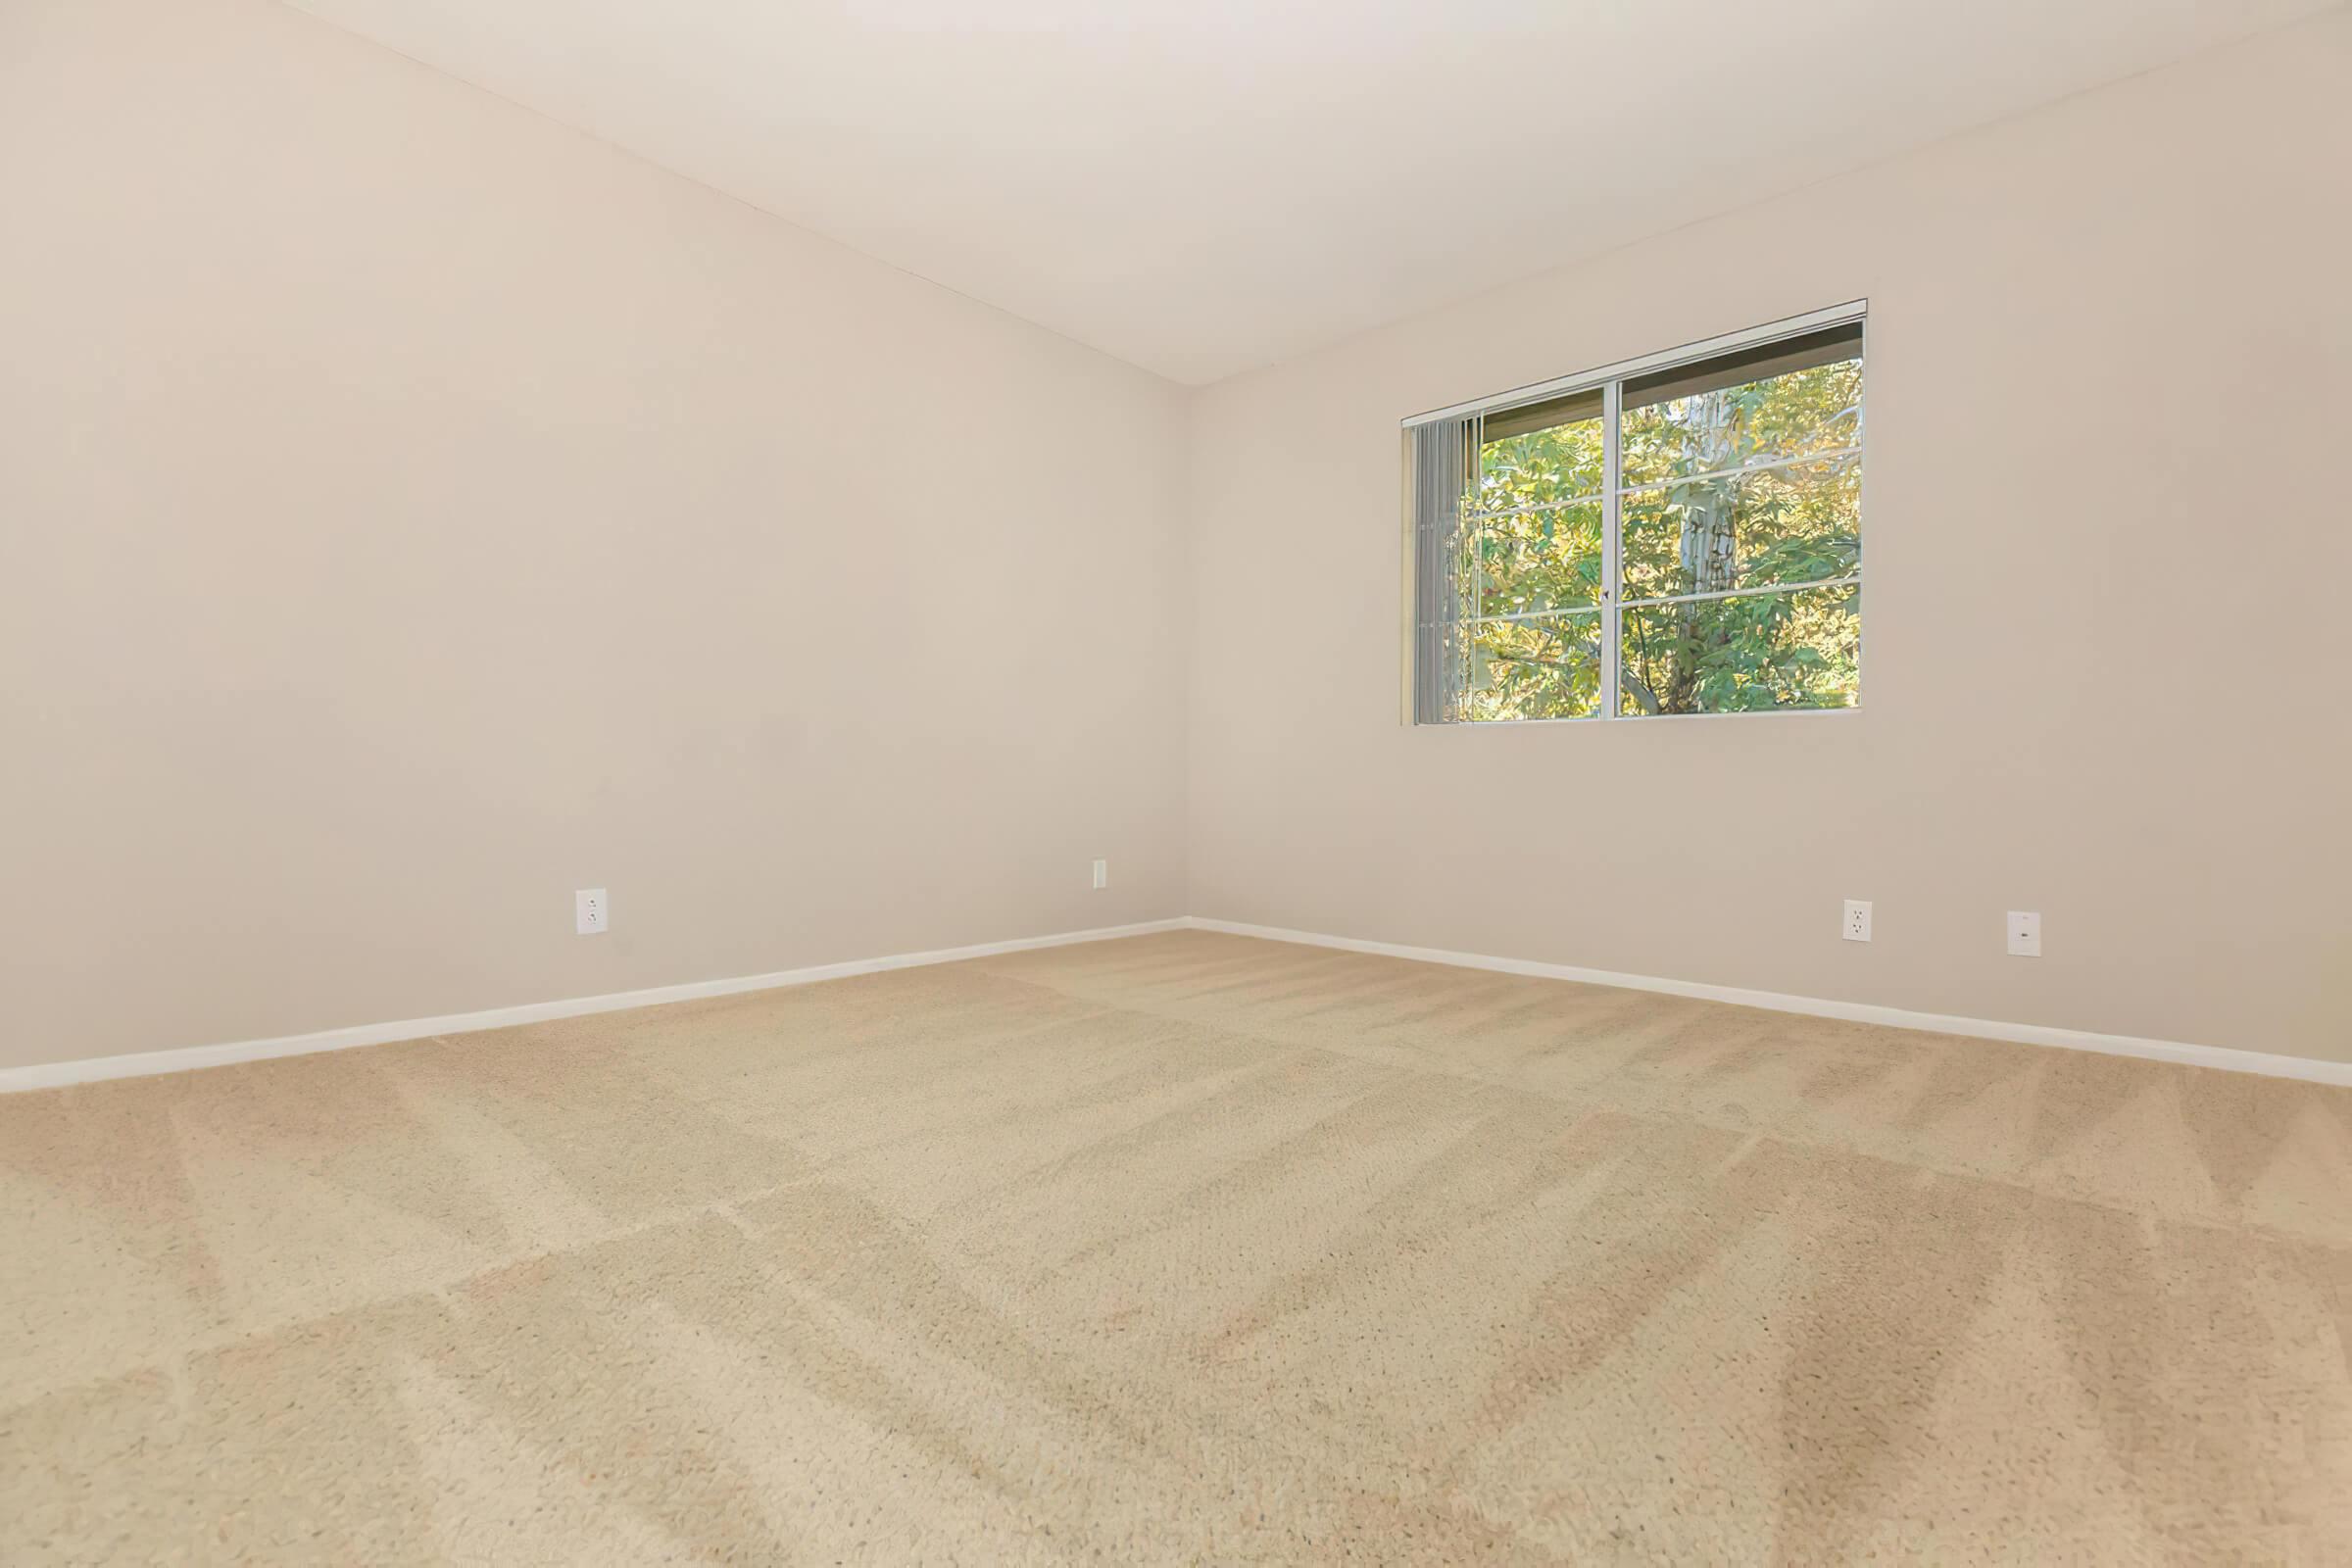 Vacant carpeted bedroom